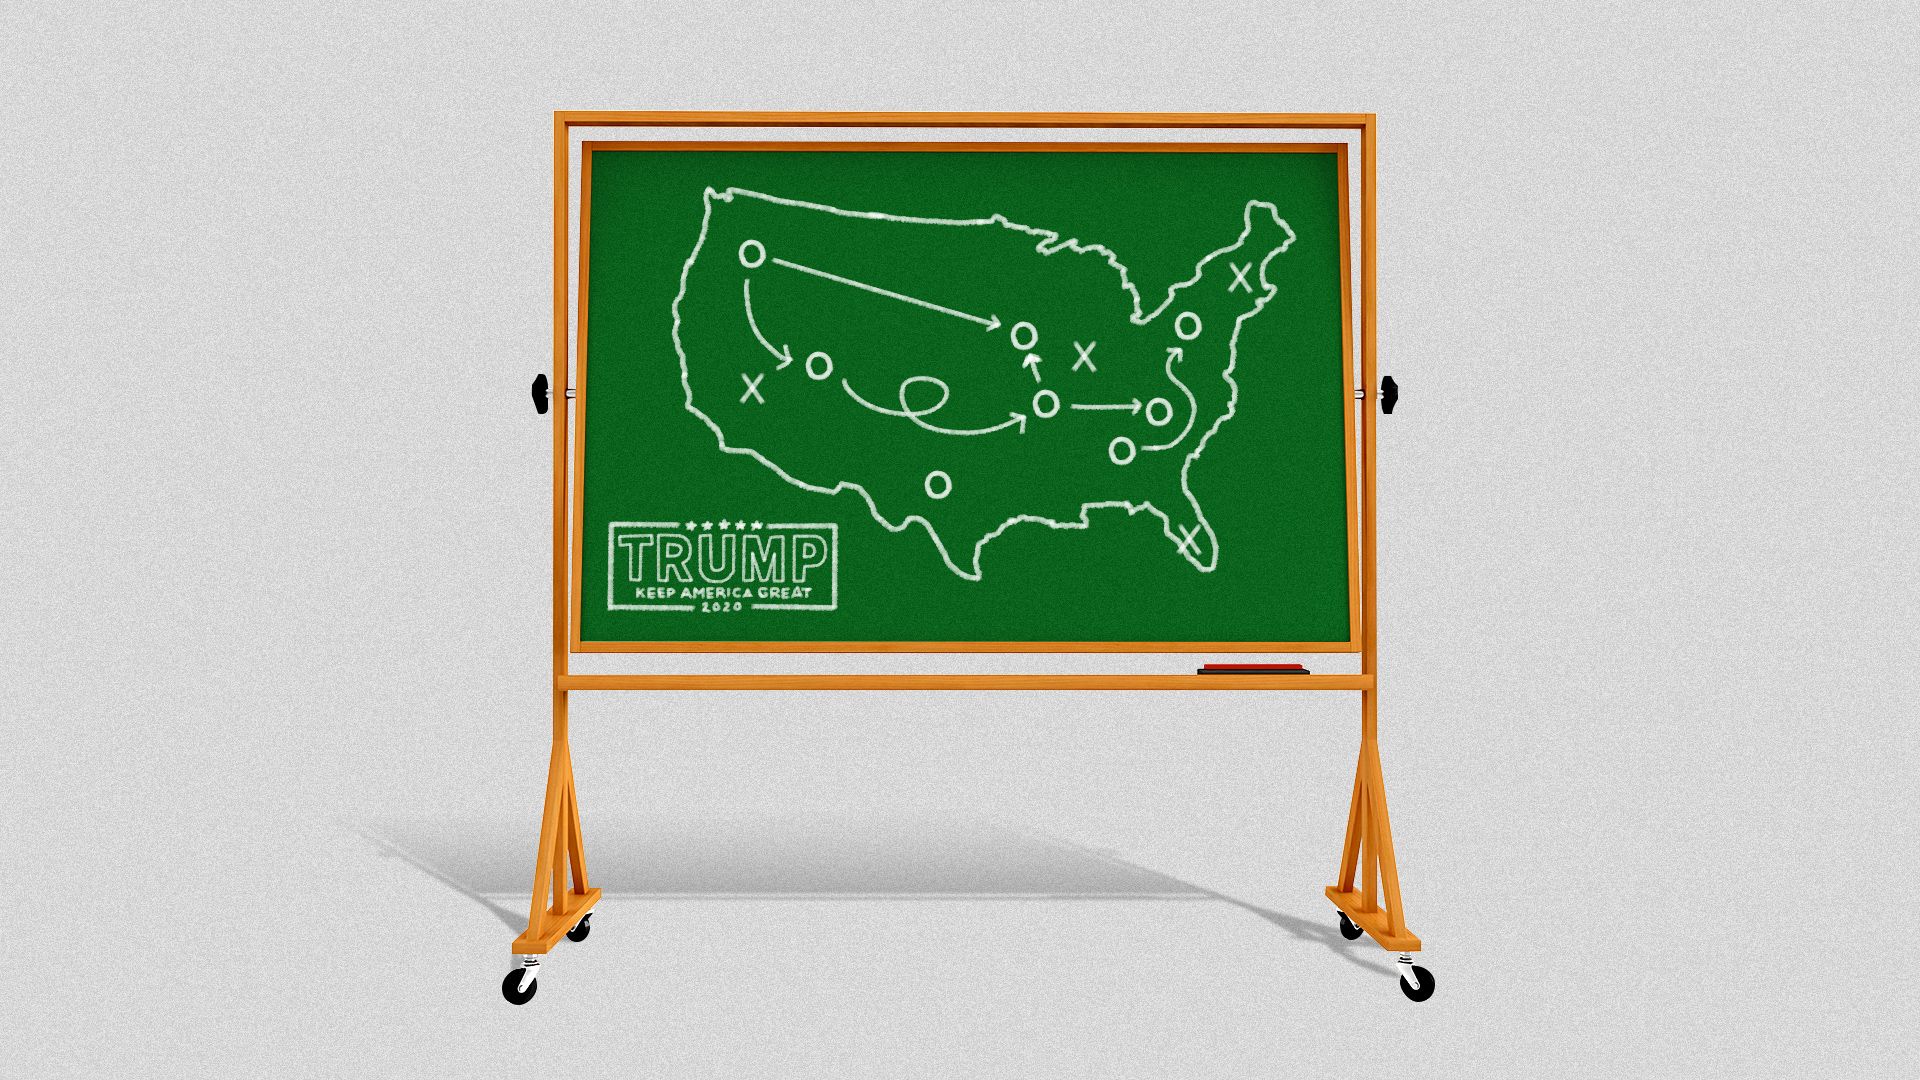 Illustration of a chalk board that says Trump 2020 with a map of the United States and diagrams like a football play